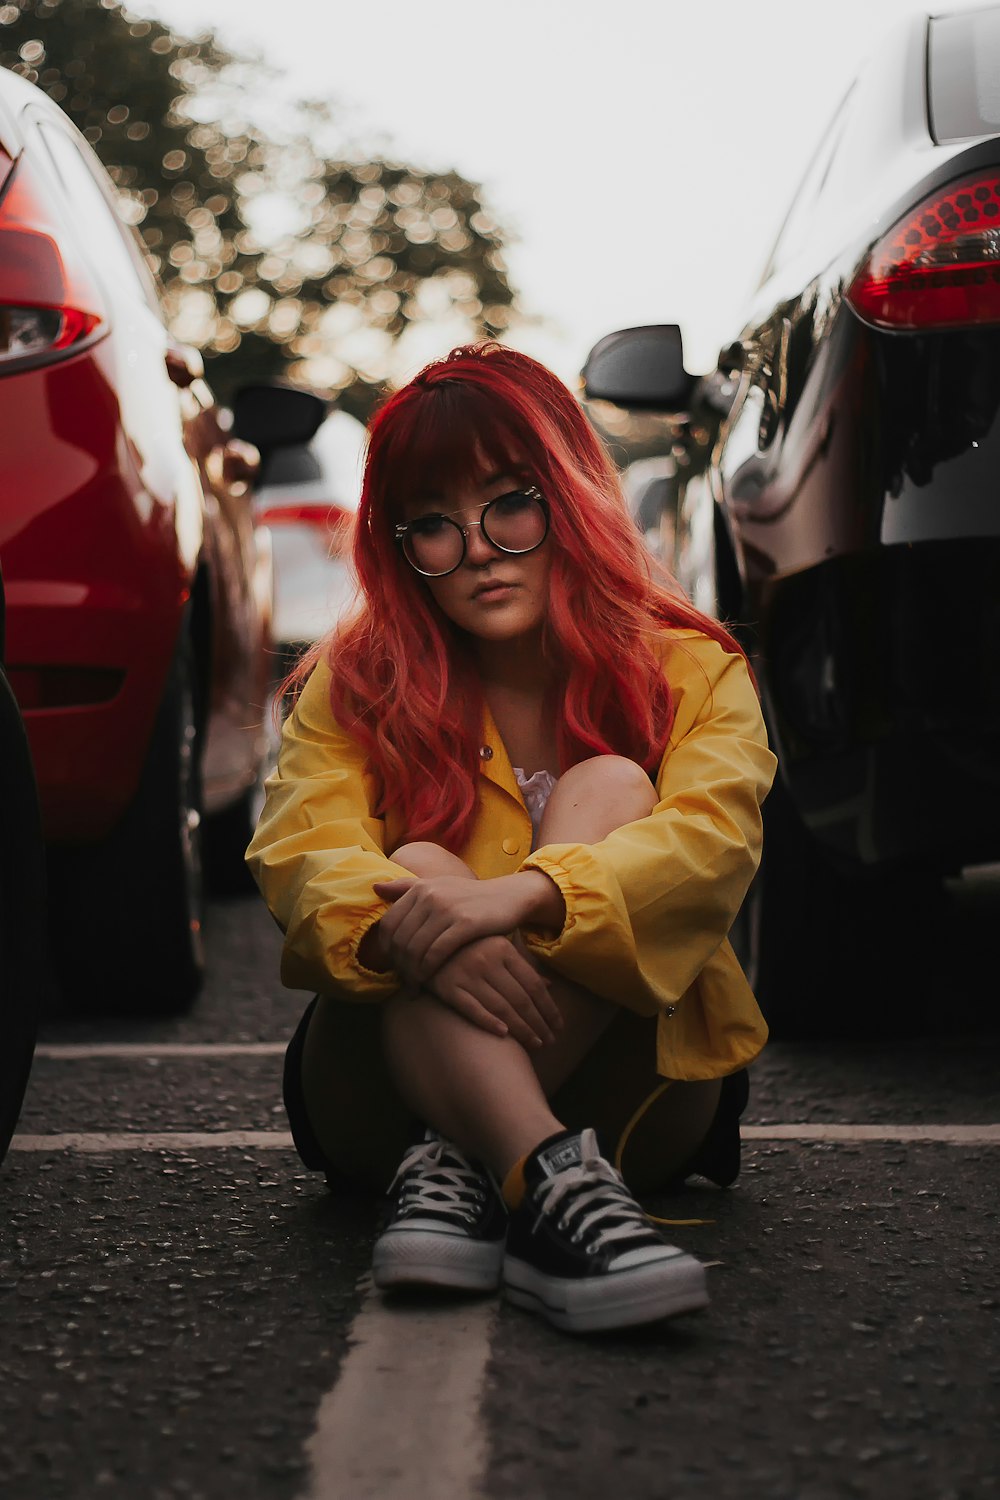 a woman with red hair and glasses sitting on the ground